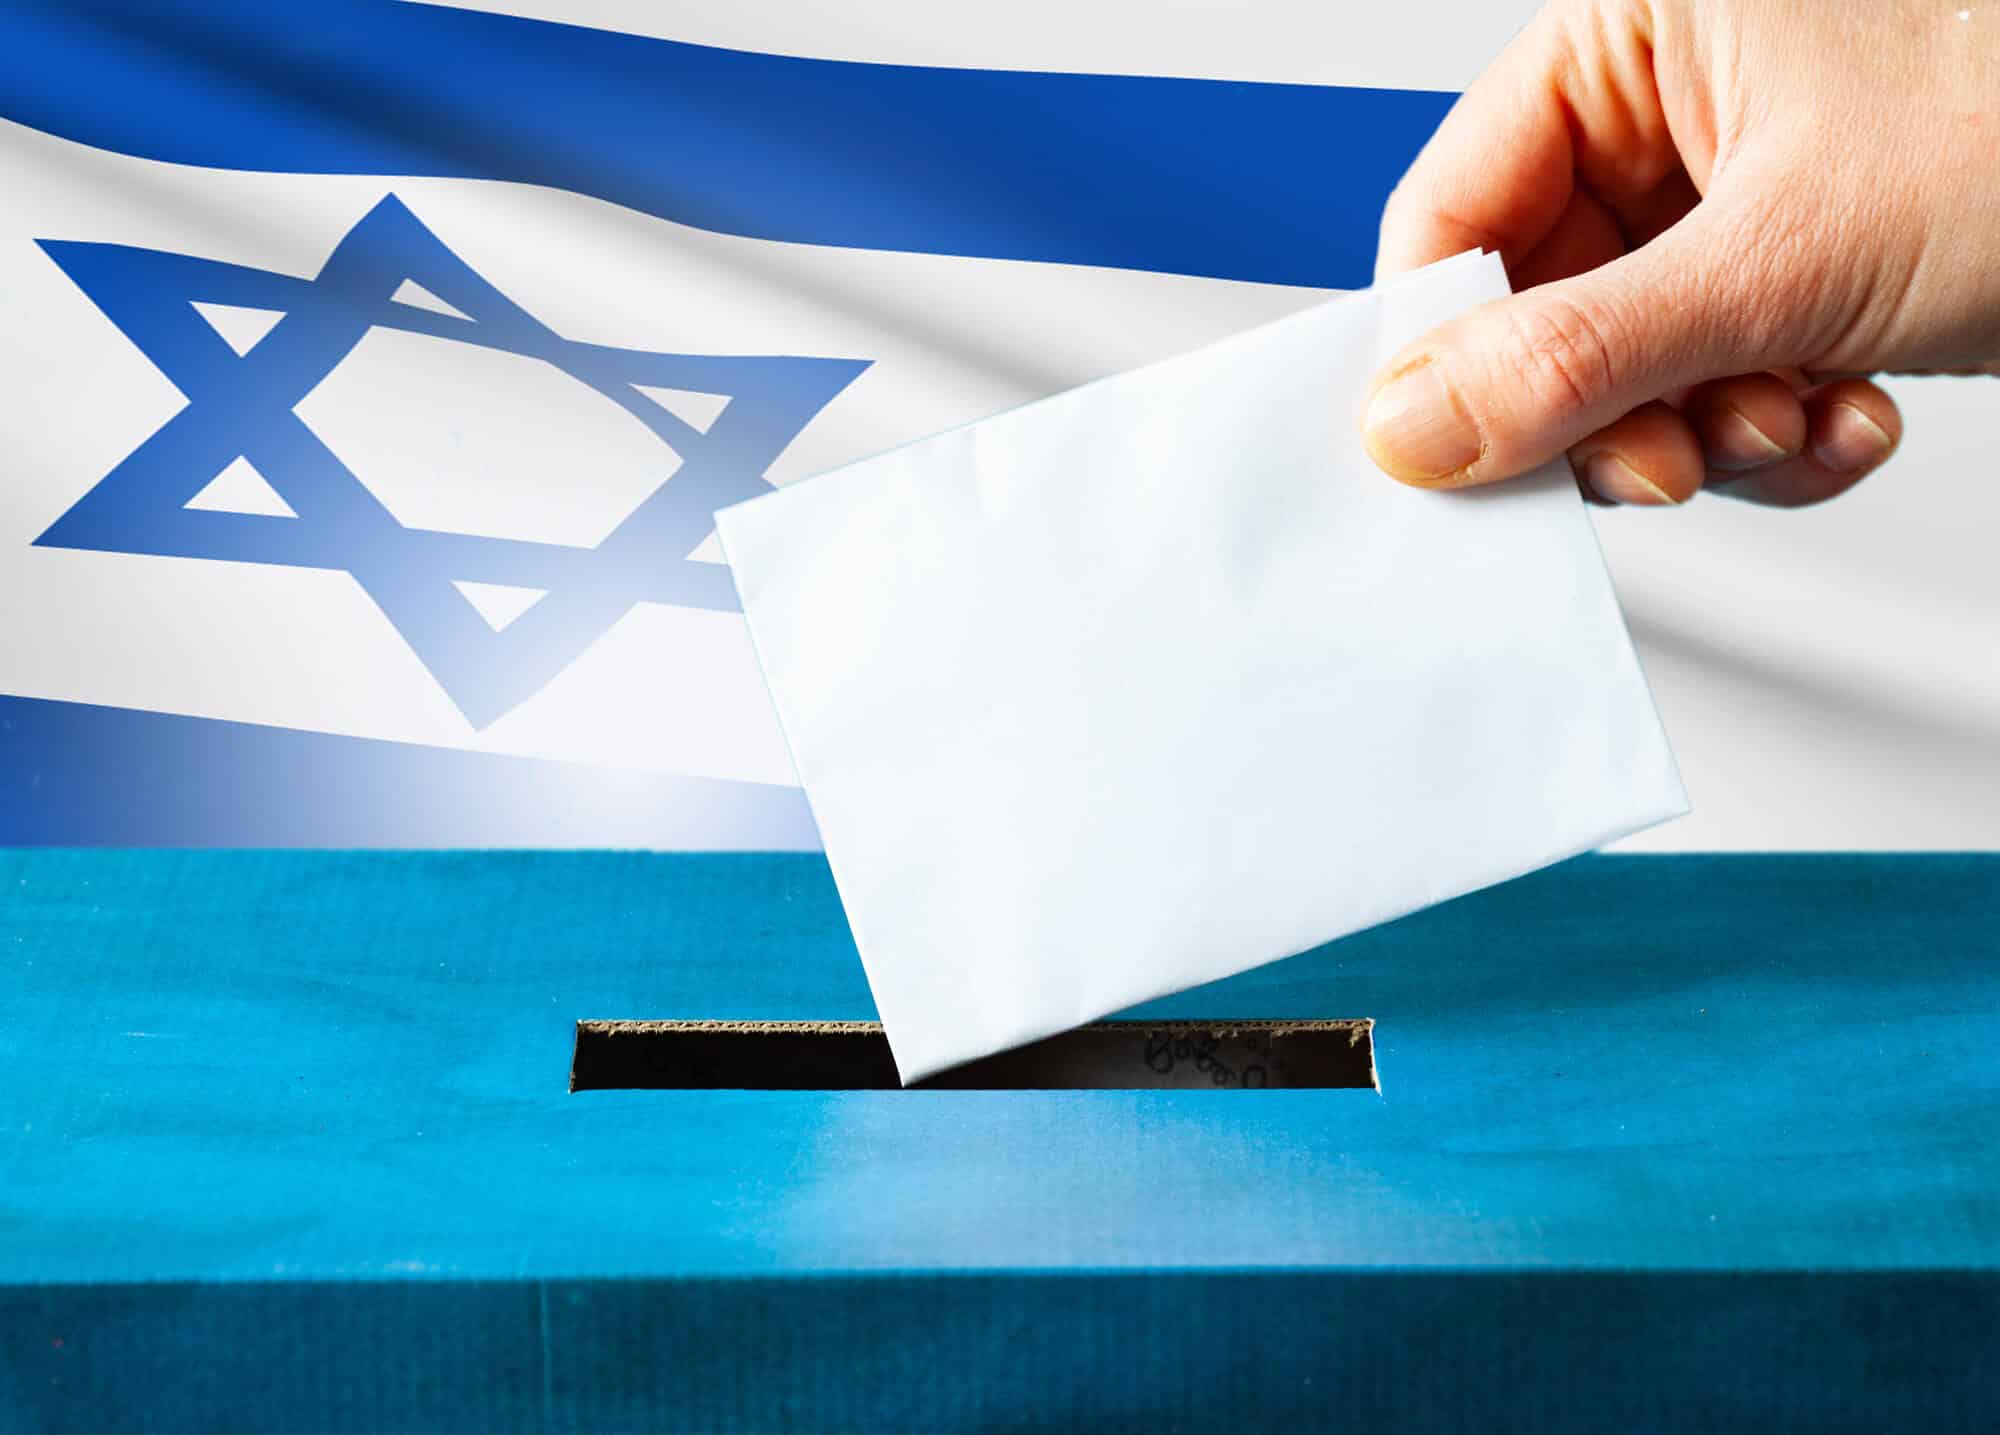 My ballot in the Knesset elections. Illustration: depositphotos.com